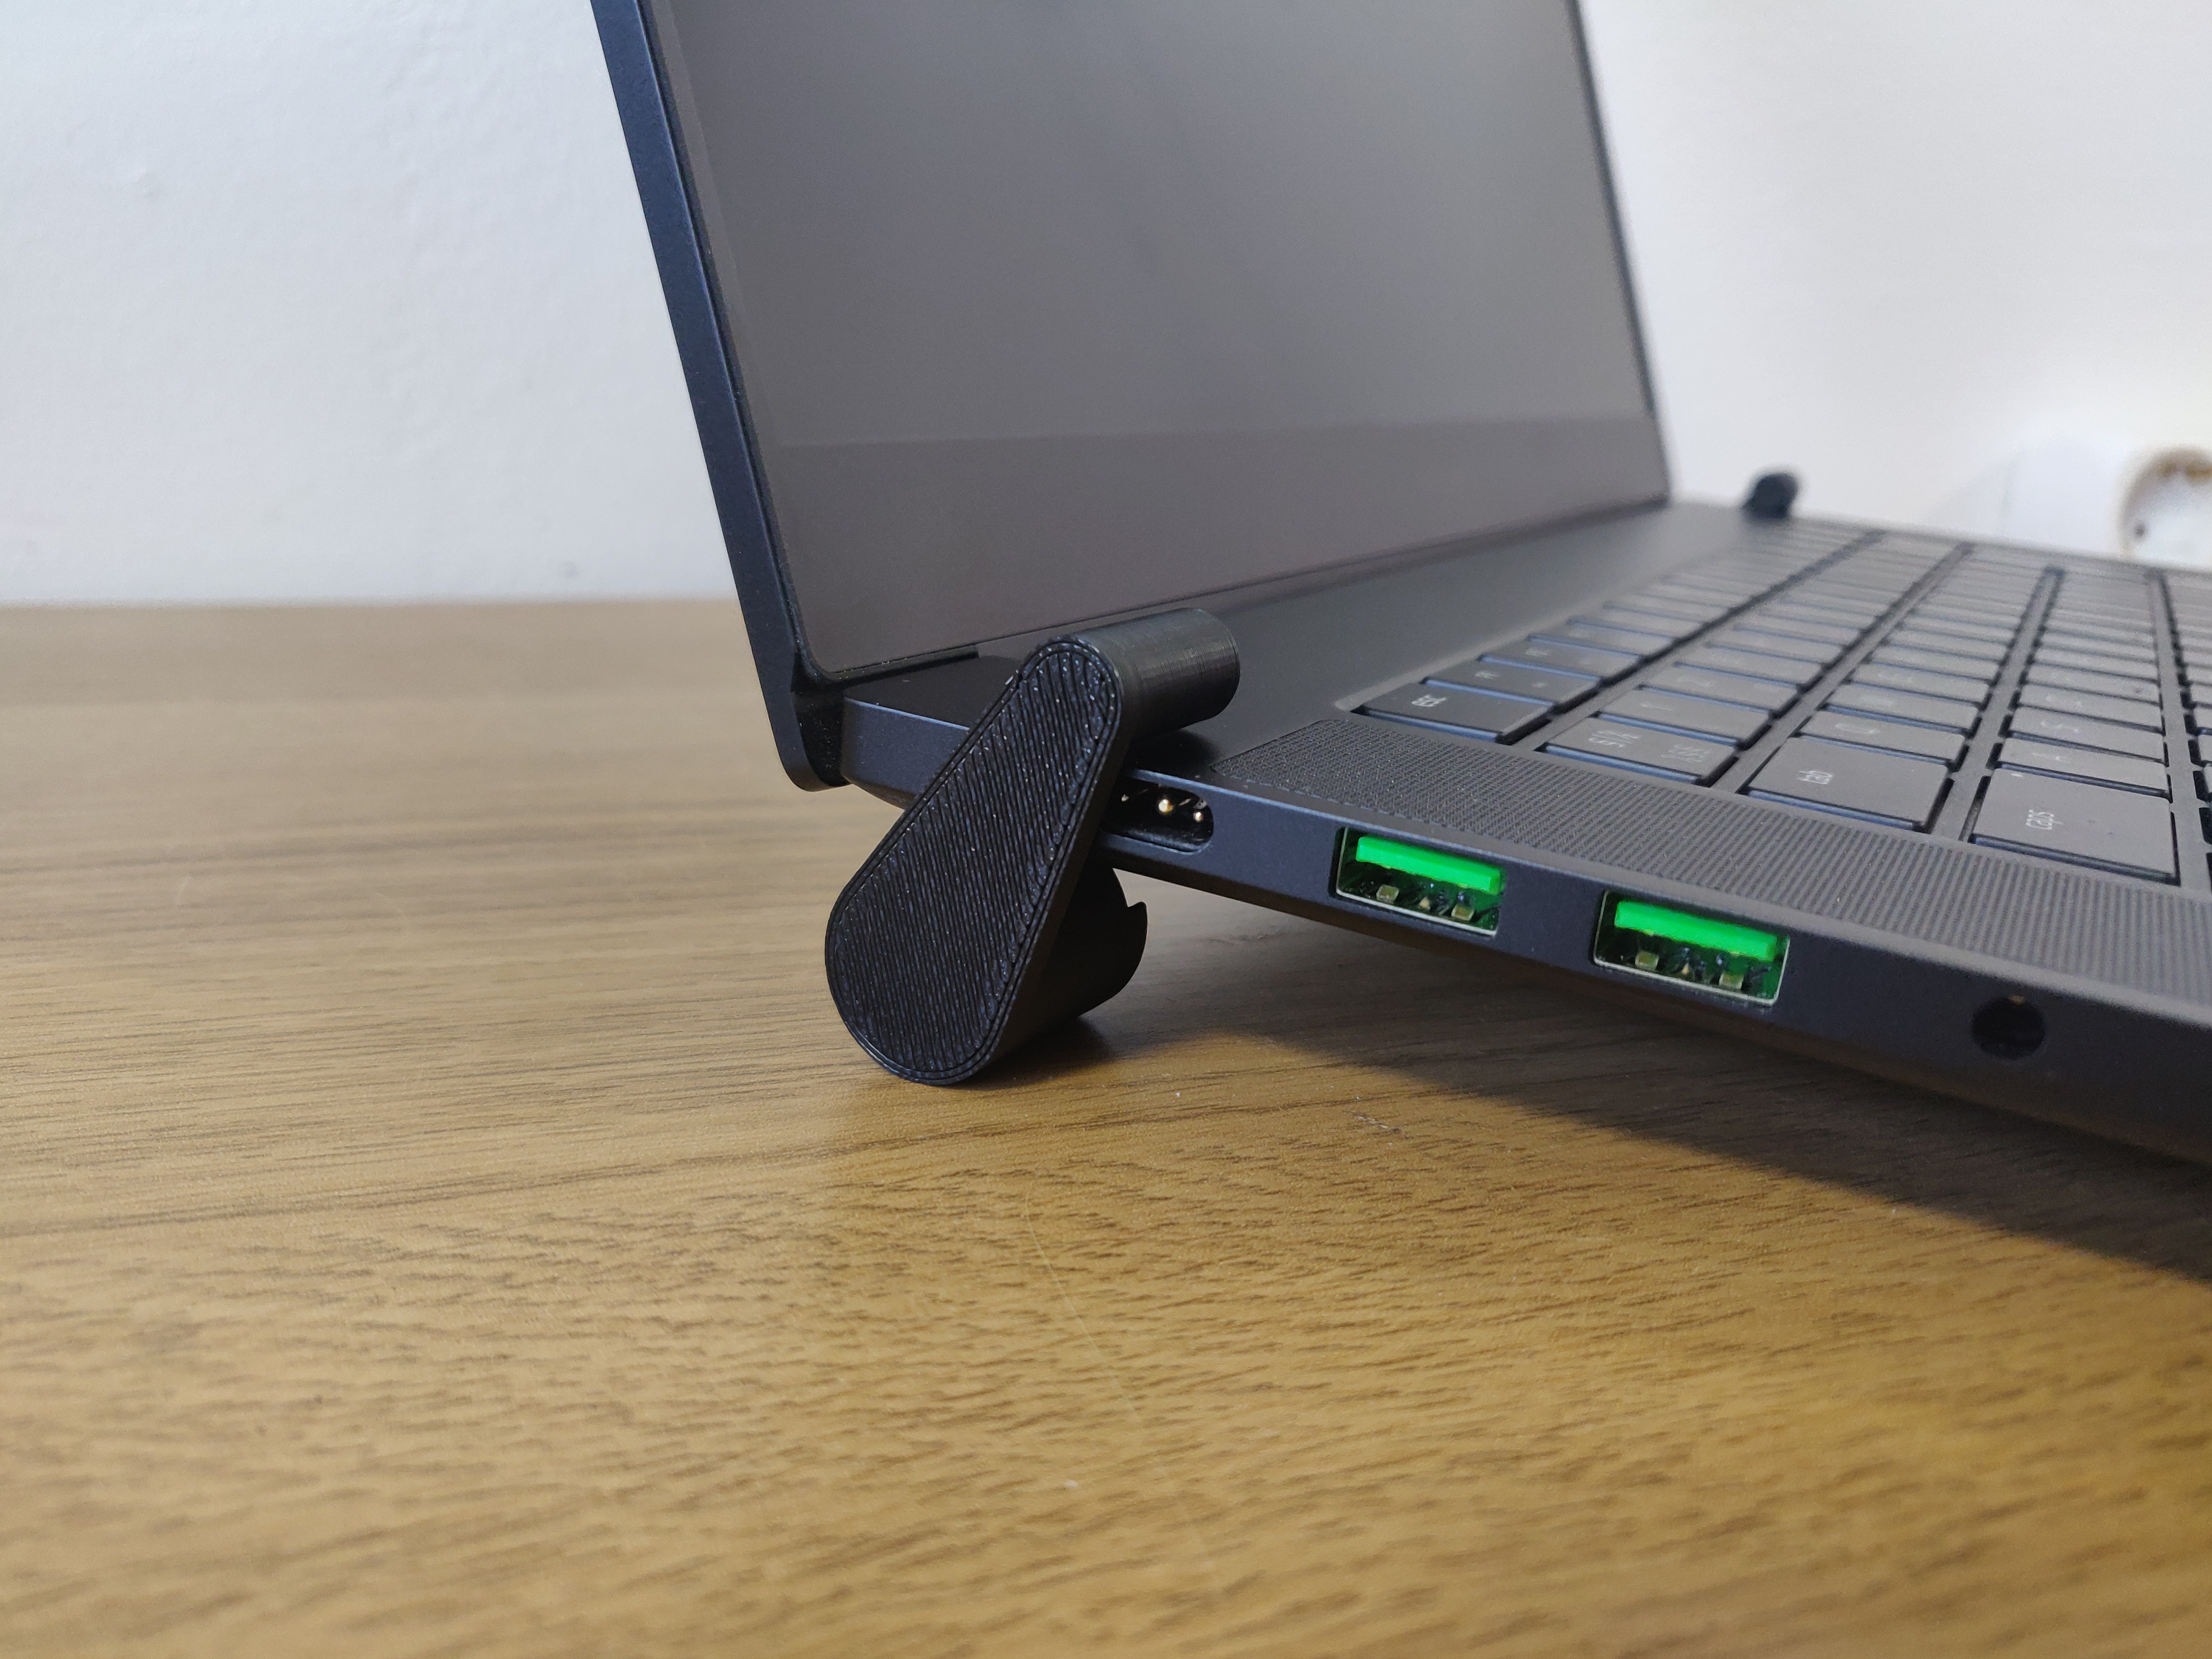 KUNA laptop stand with 15mm clearance